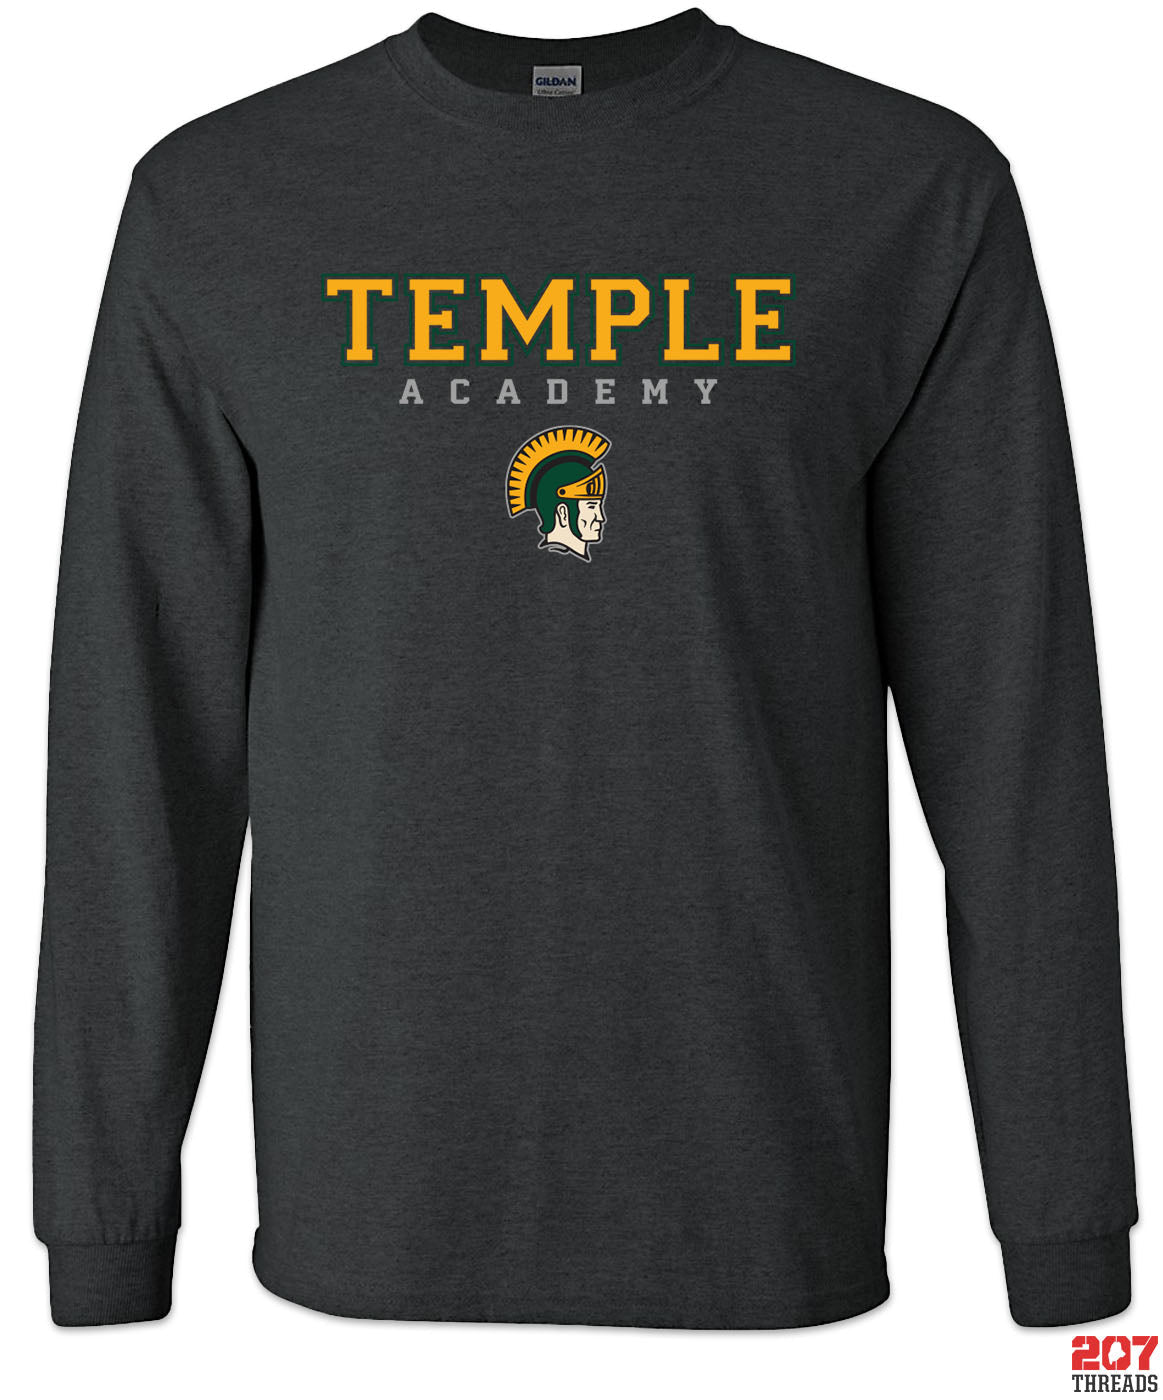 Temple Academy T-Shirt - Yellow Letter-207 Threads